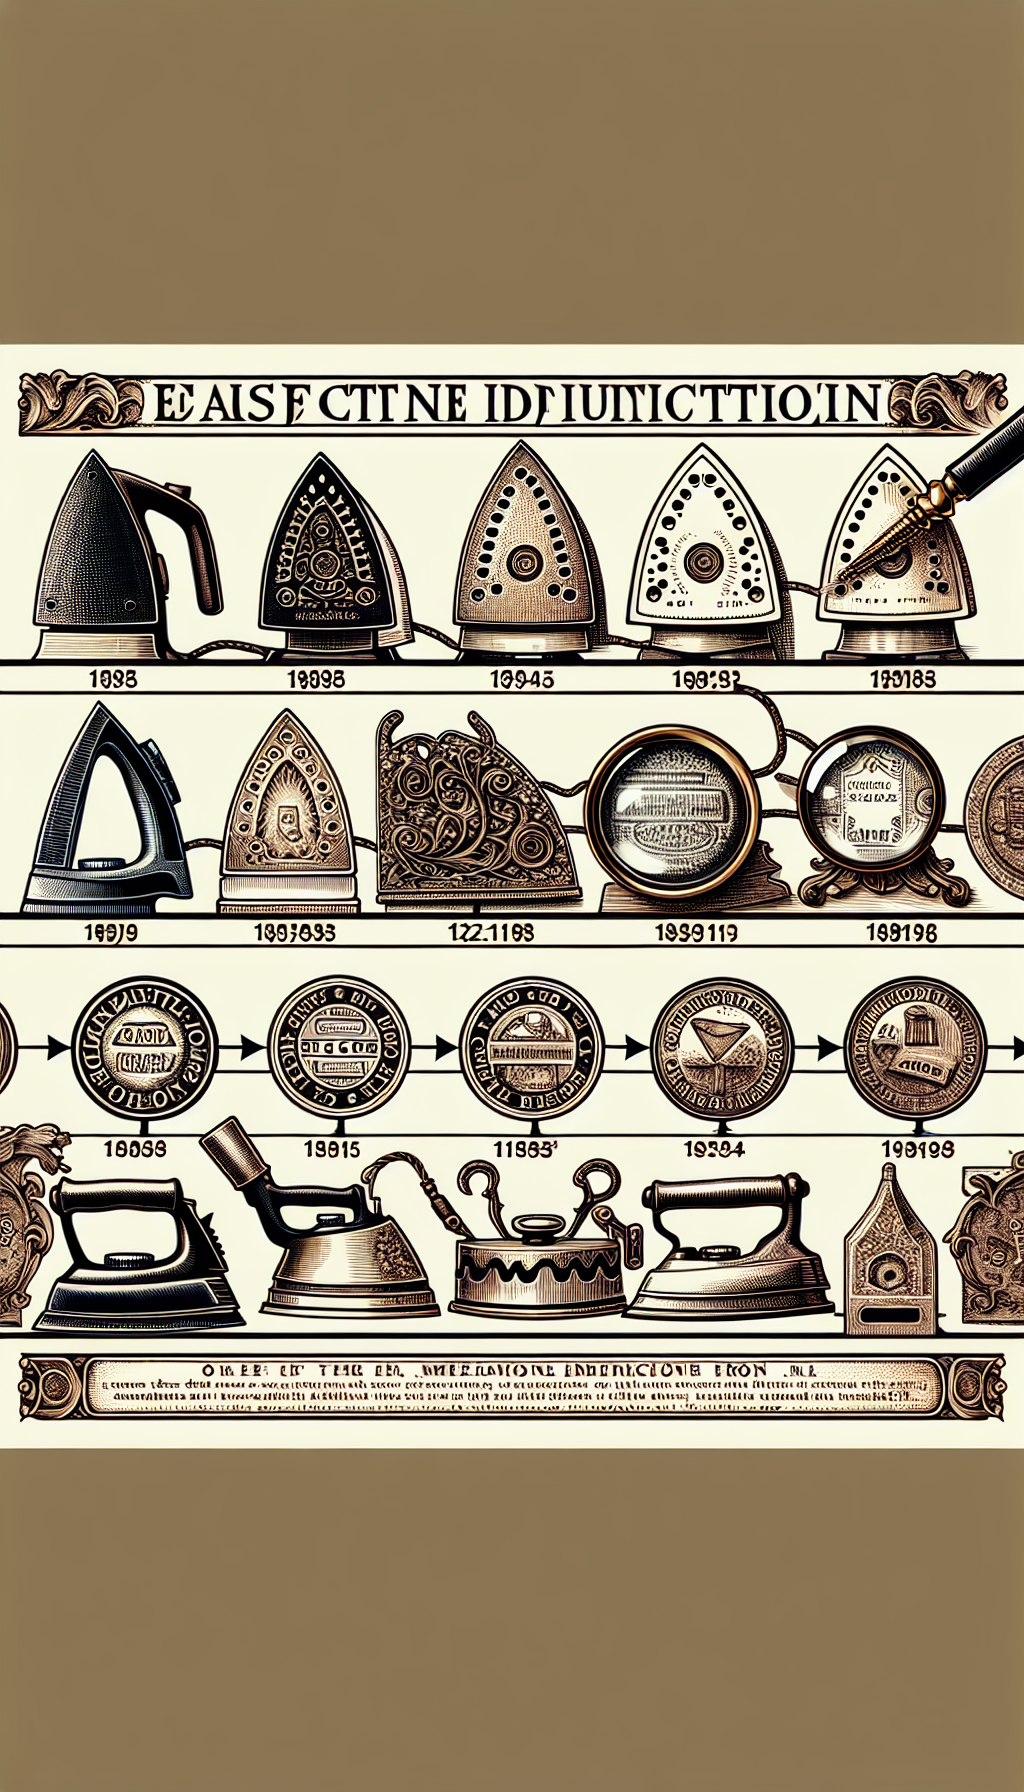 An illustrated timeline flows from left to right, morphing a plain, crude utility iron into an ornate, rare collector's sad iron, each with identification tags and year marks. Variegated styles—from woodcut to baroque to modern line art—highlight the iron's evolution, while a magnifying glass hovers over unique identifiers, like manufacturer stamps or decorative elements, emphasizing the antique identification theme.